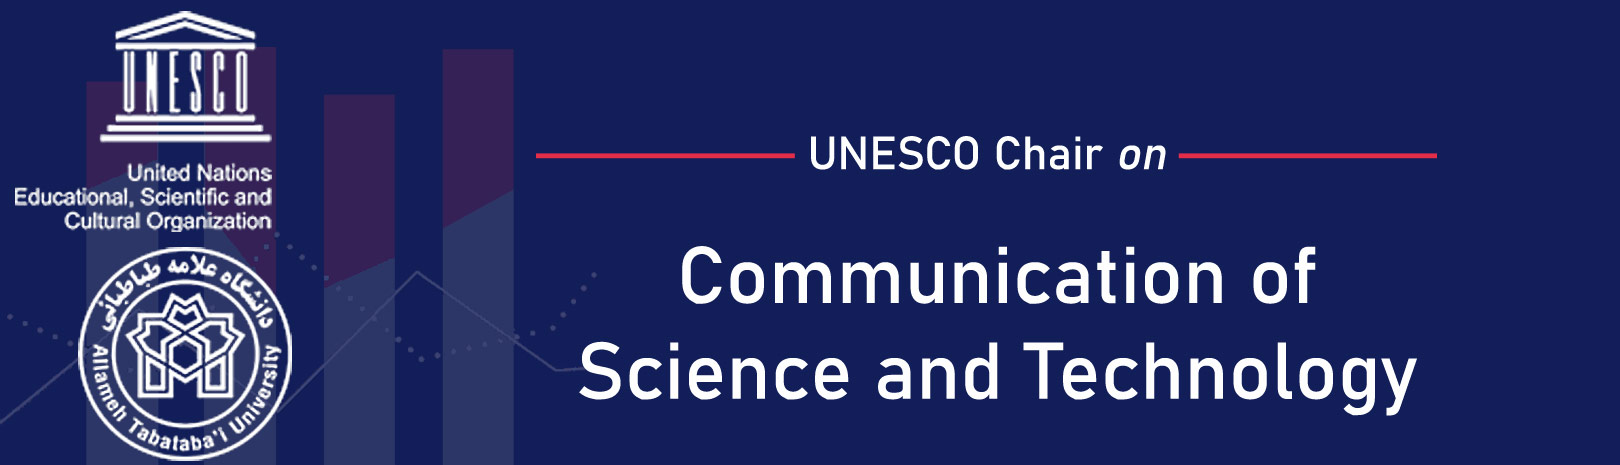 UNESCO Chair on Communication of Science and Technology, Allameh Tabatabai University